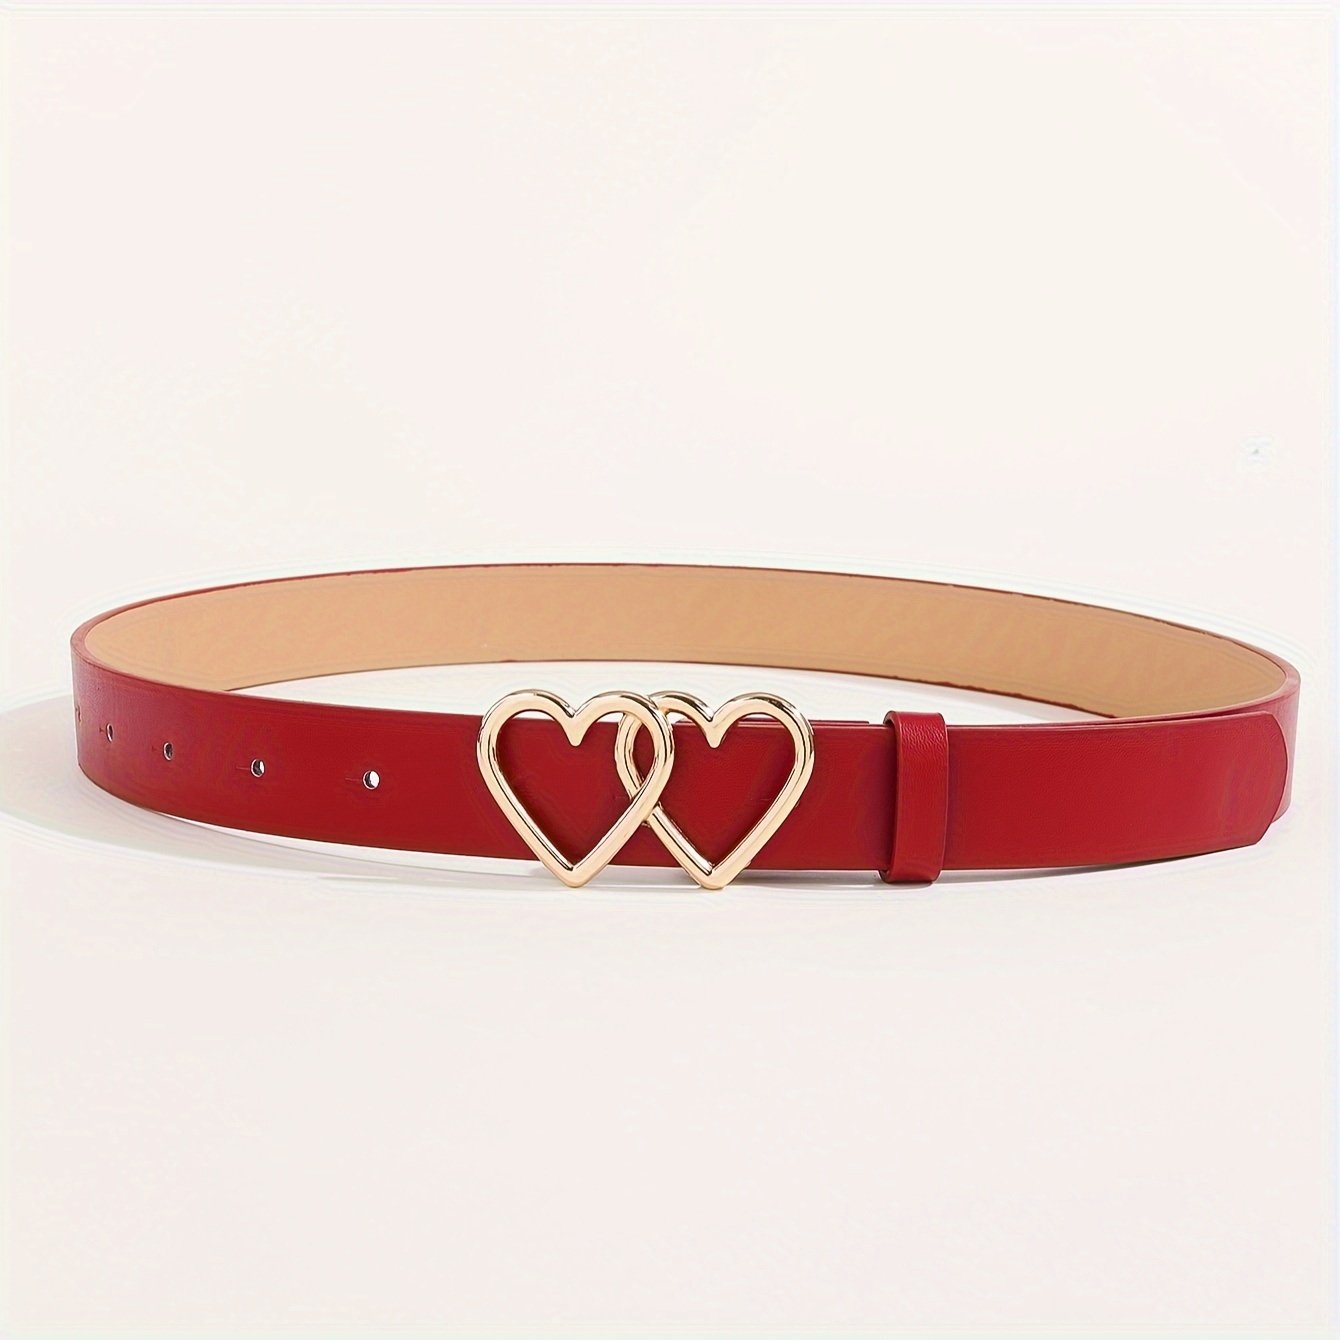 golden double heart buckle belt trendy red pu leather belt for women casual jeans pants belts valentines day gift